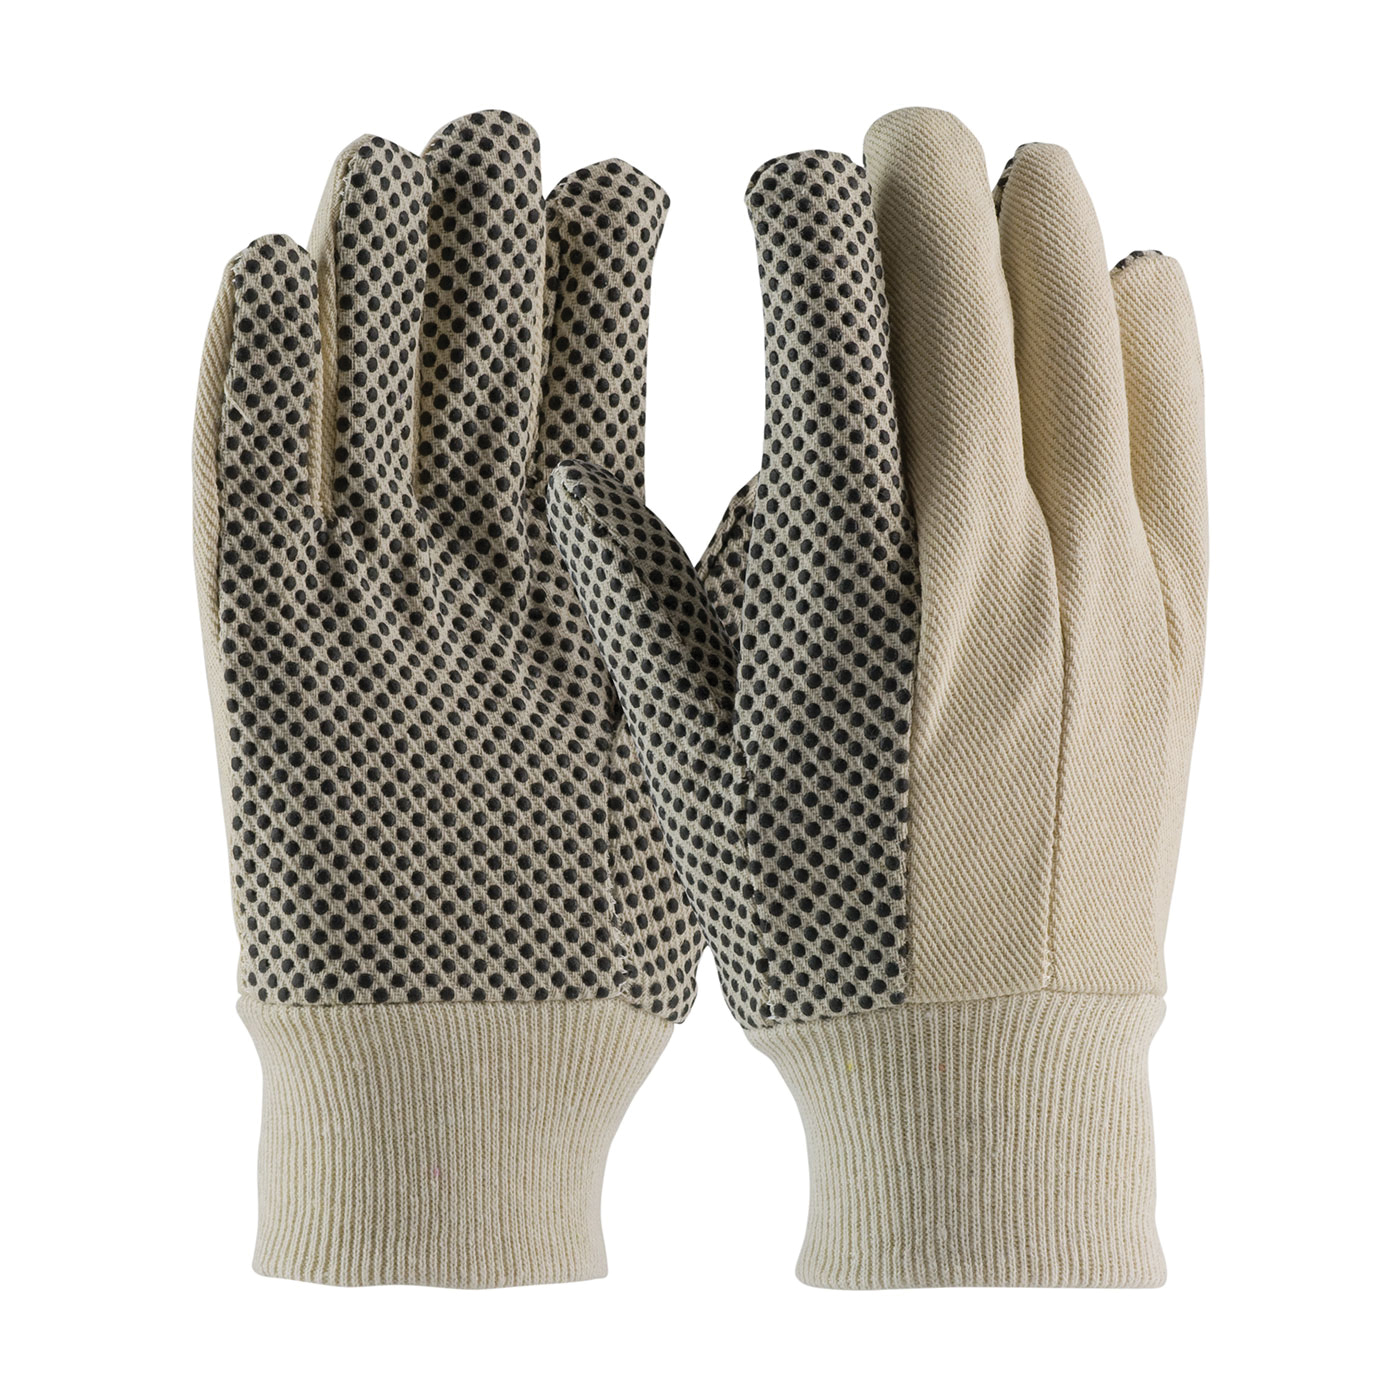 PIP® 780K General Purpose Gloves, Coated/Work, Clute Cut/Full Finger/Straight Thumb Style, L, Cotton/Polyester/PVC Palm, 8 oz Poly/Cotton Canvas, Black/White, Knit Wrist Cuff, PVC Coating